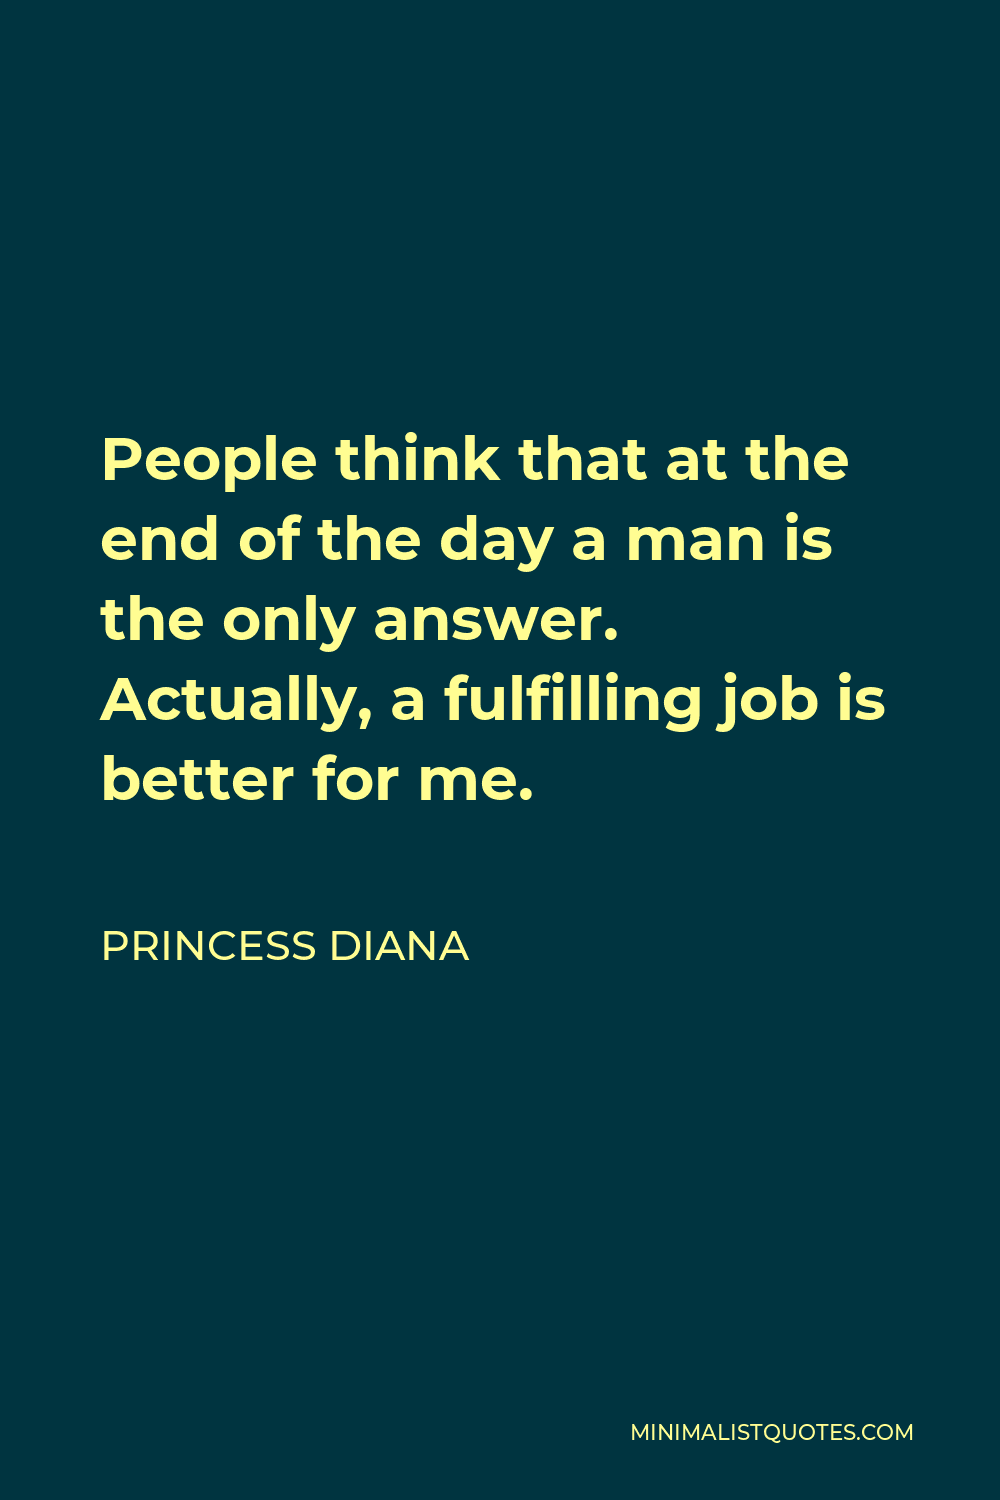 Princess Diana Quote - People think that at the end of the day a man is the only answer. Actually, a fulfilling job is better for me.